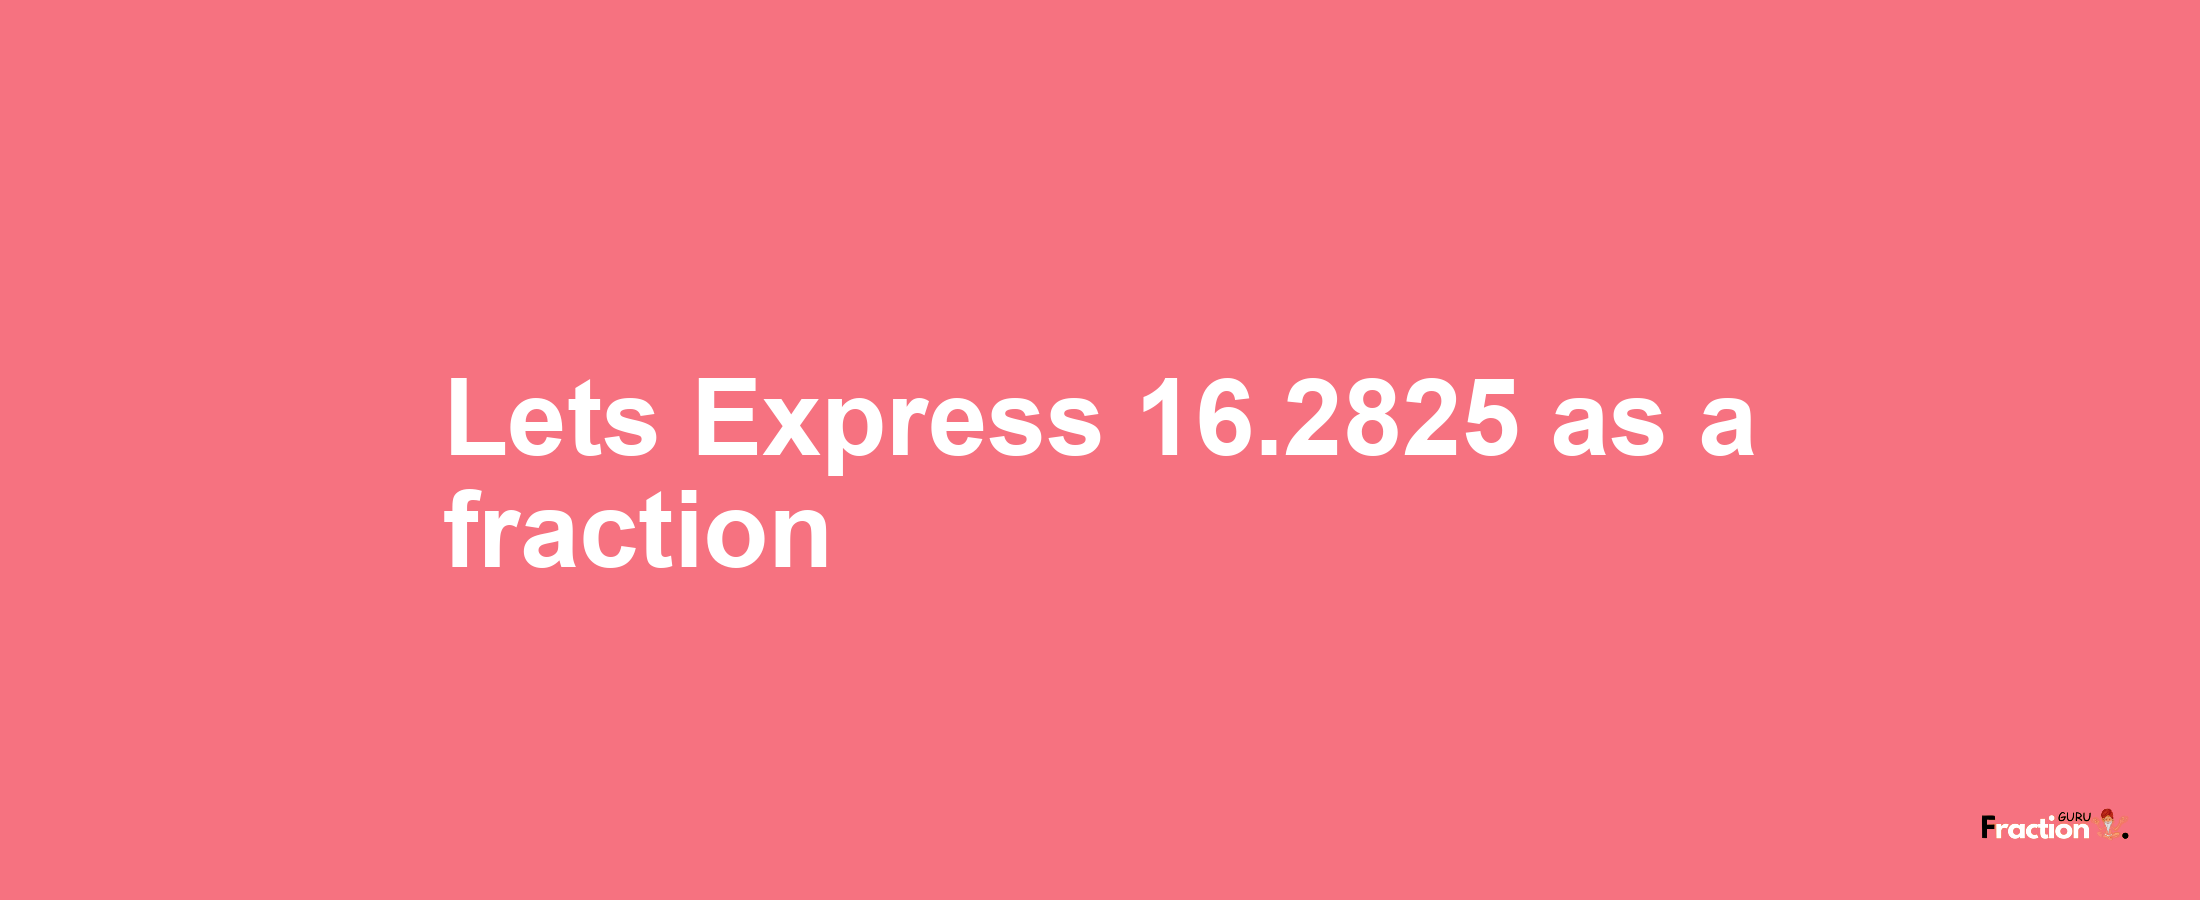 Lets Express 16.2825 as afraction